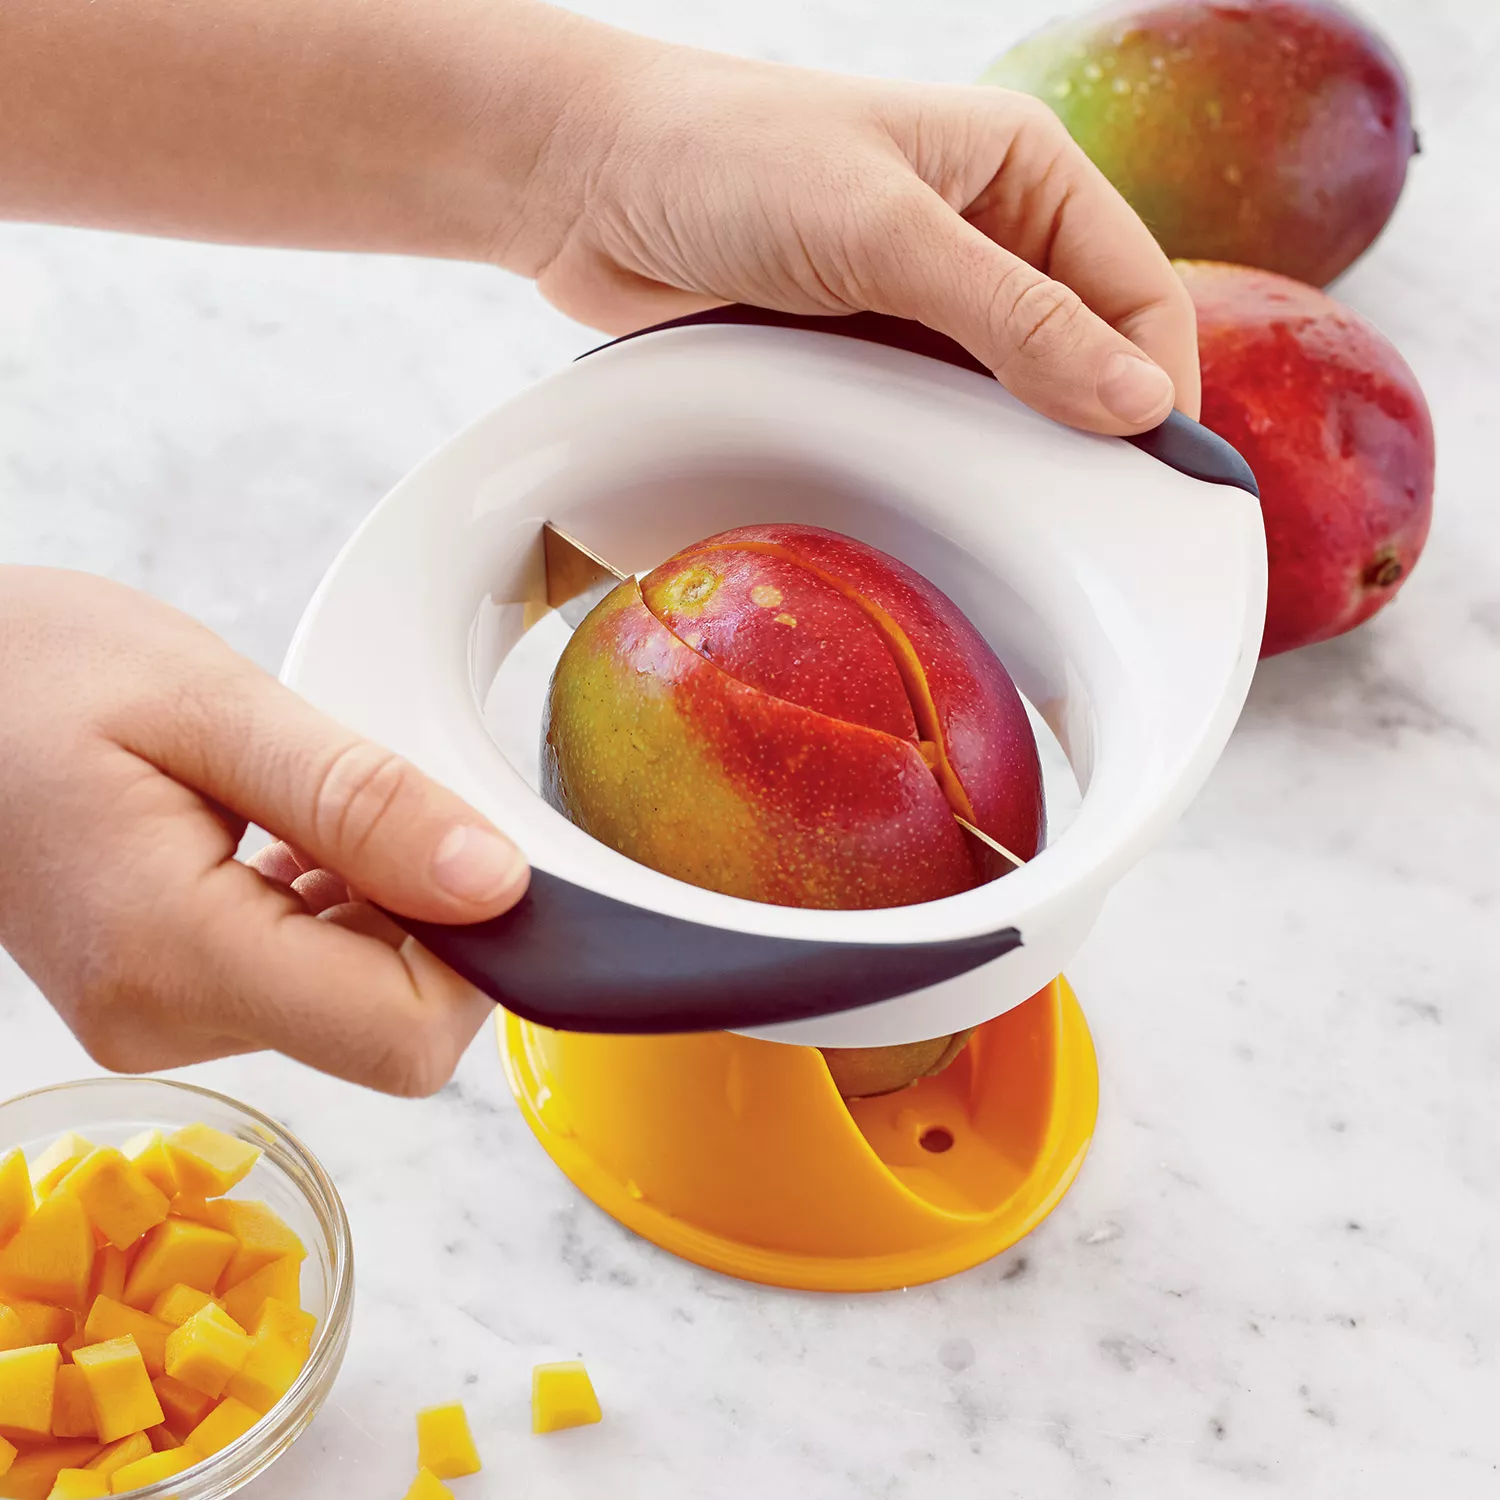 zyliss 3in1 mango slicer, peeler and pit remover tool 